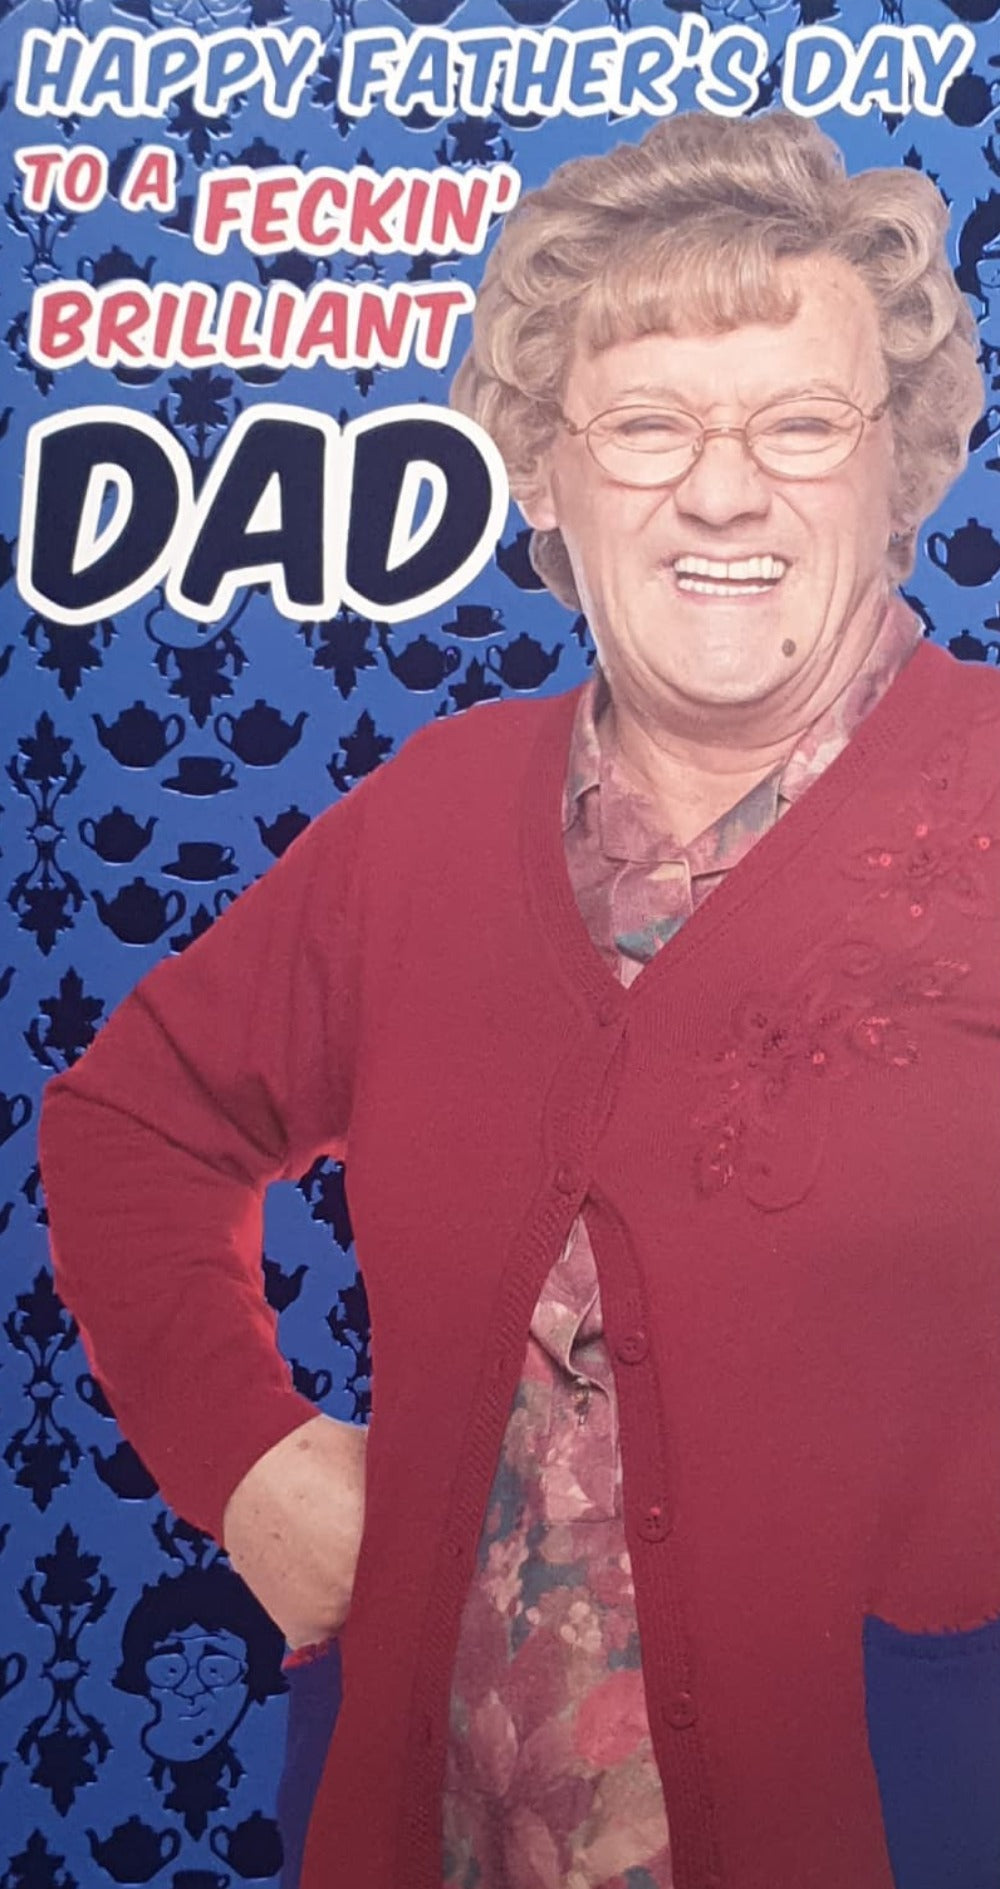 Fathers Day Card - Dad / Humour